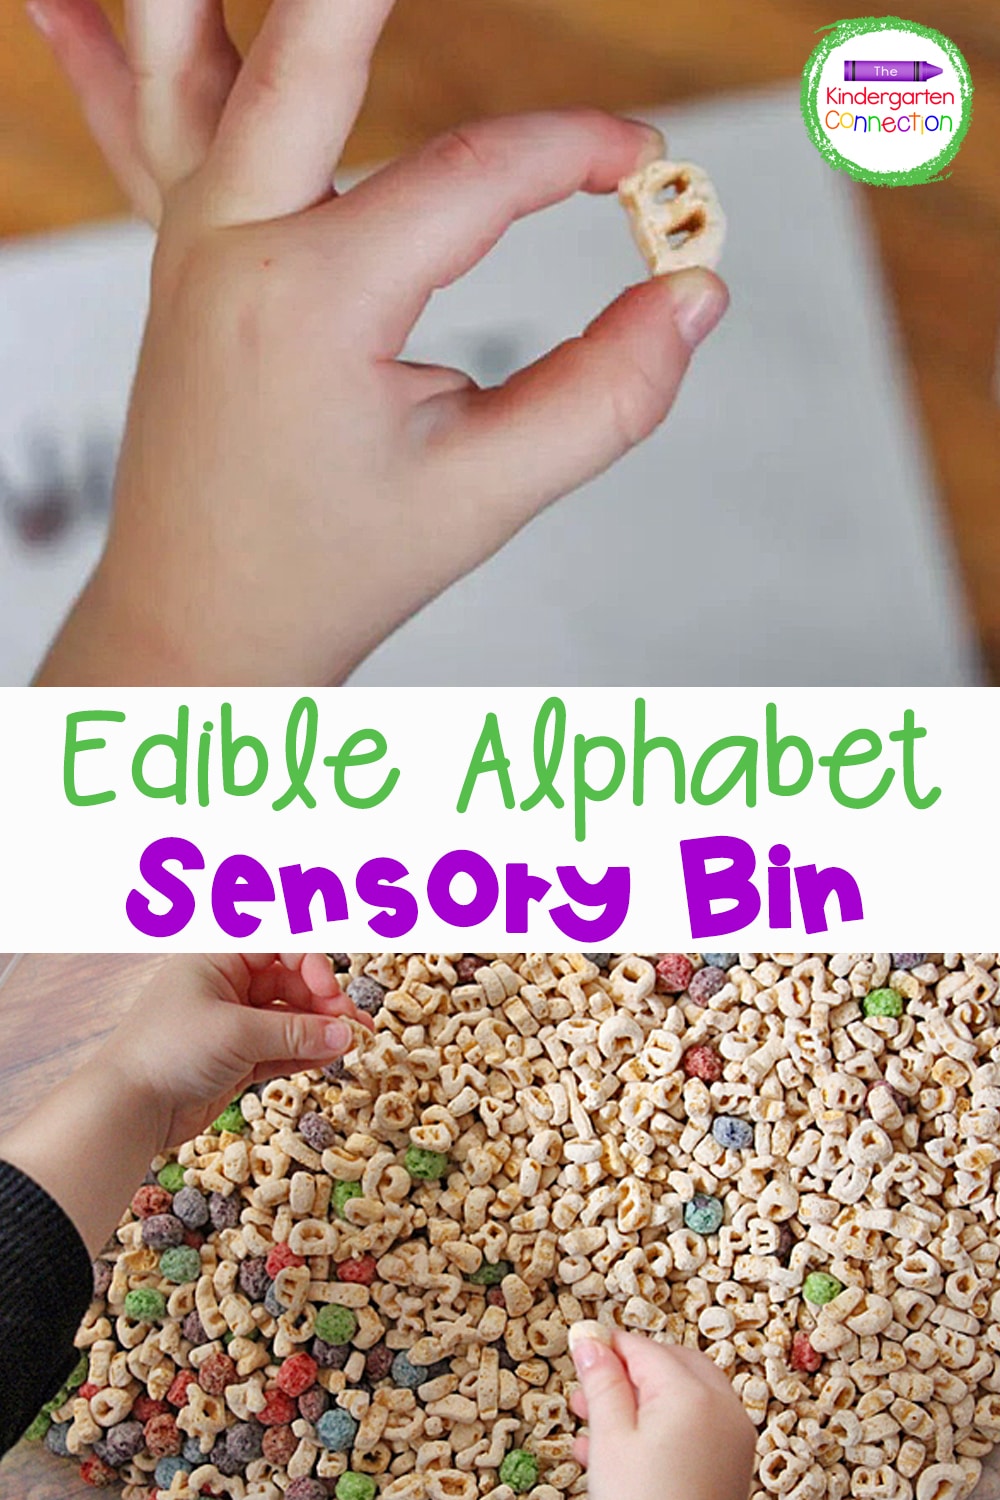 This Edible Alphabet Sensory Bin is low cost and simple but the opportunities for teaching letter recognition and sounds are endless!